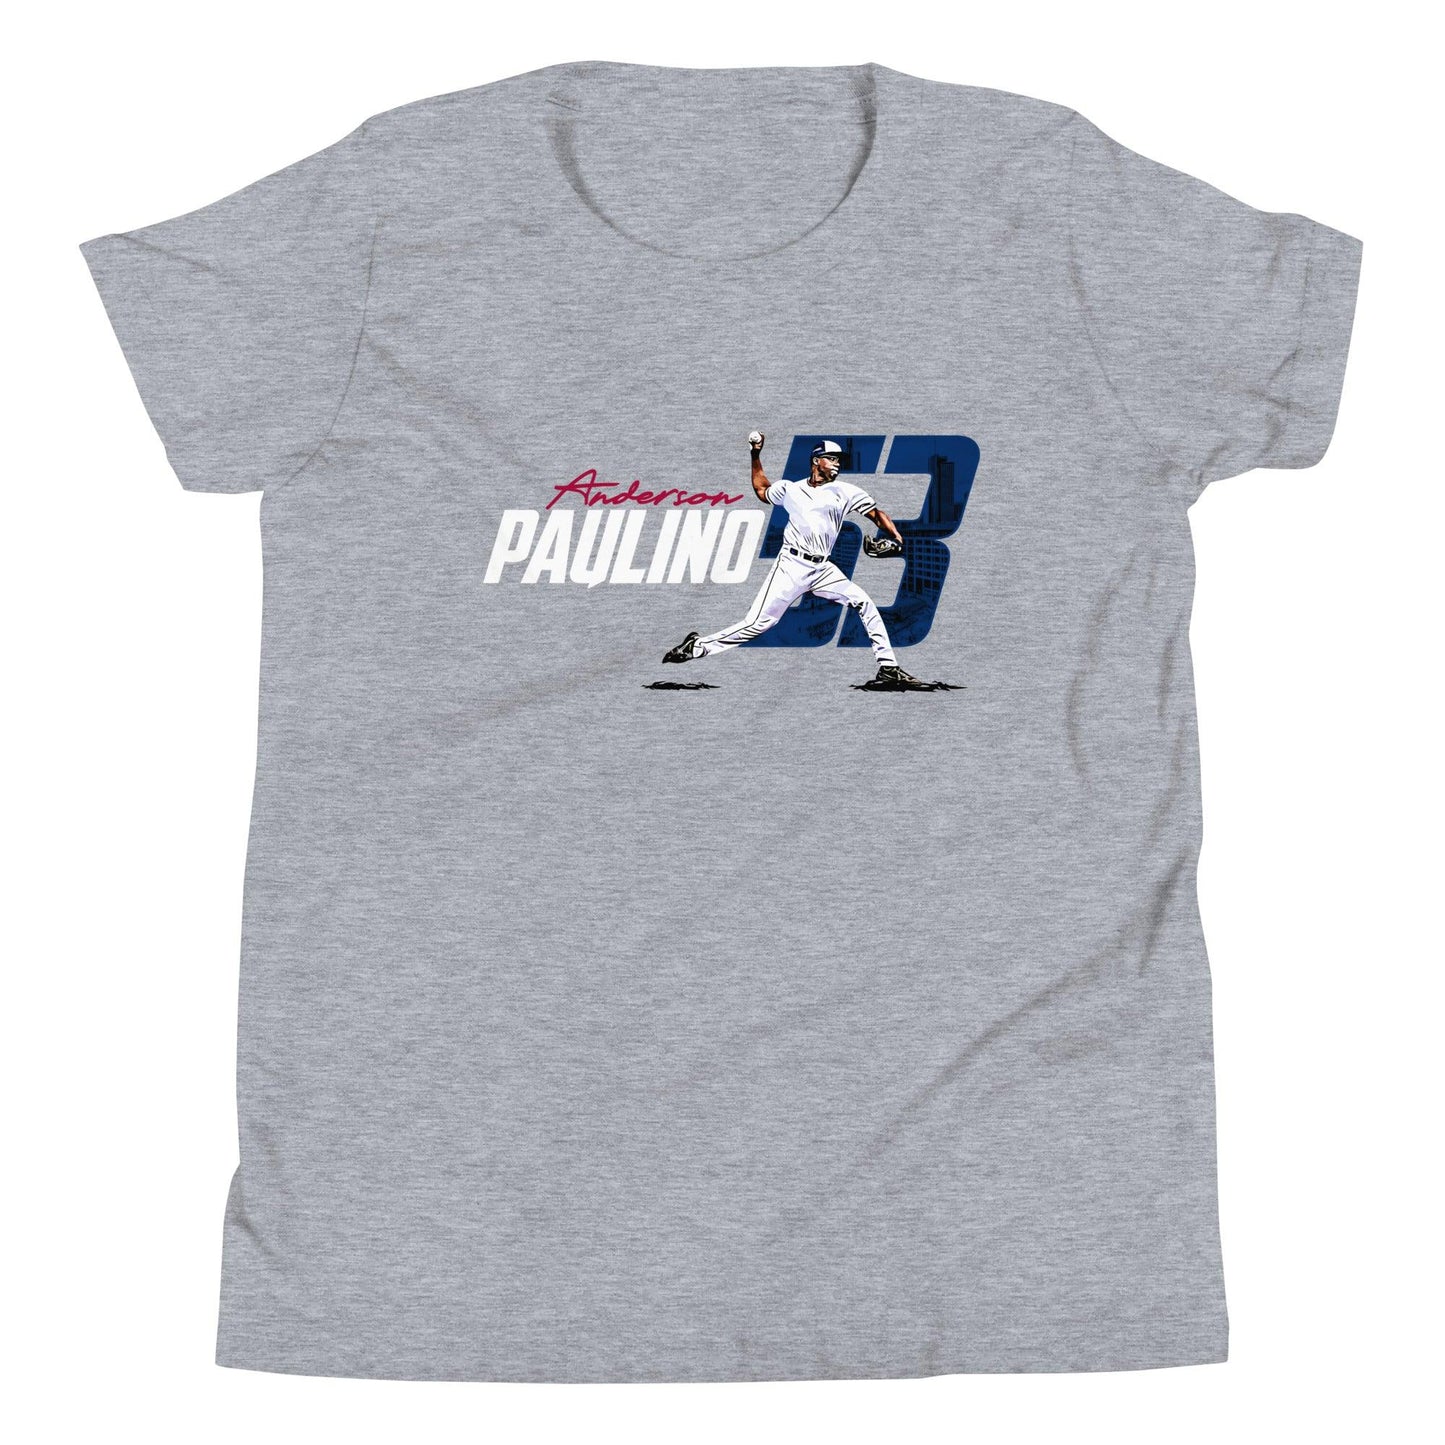 Anderson Paulino "Gameday" Youth T-Shirt - Fan Arch